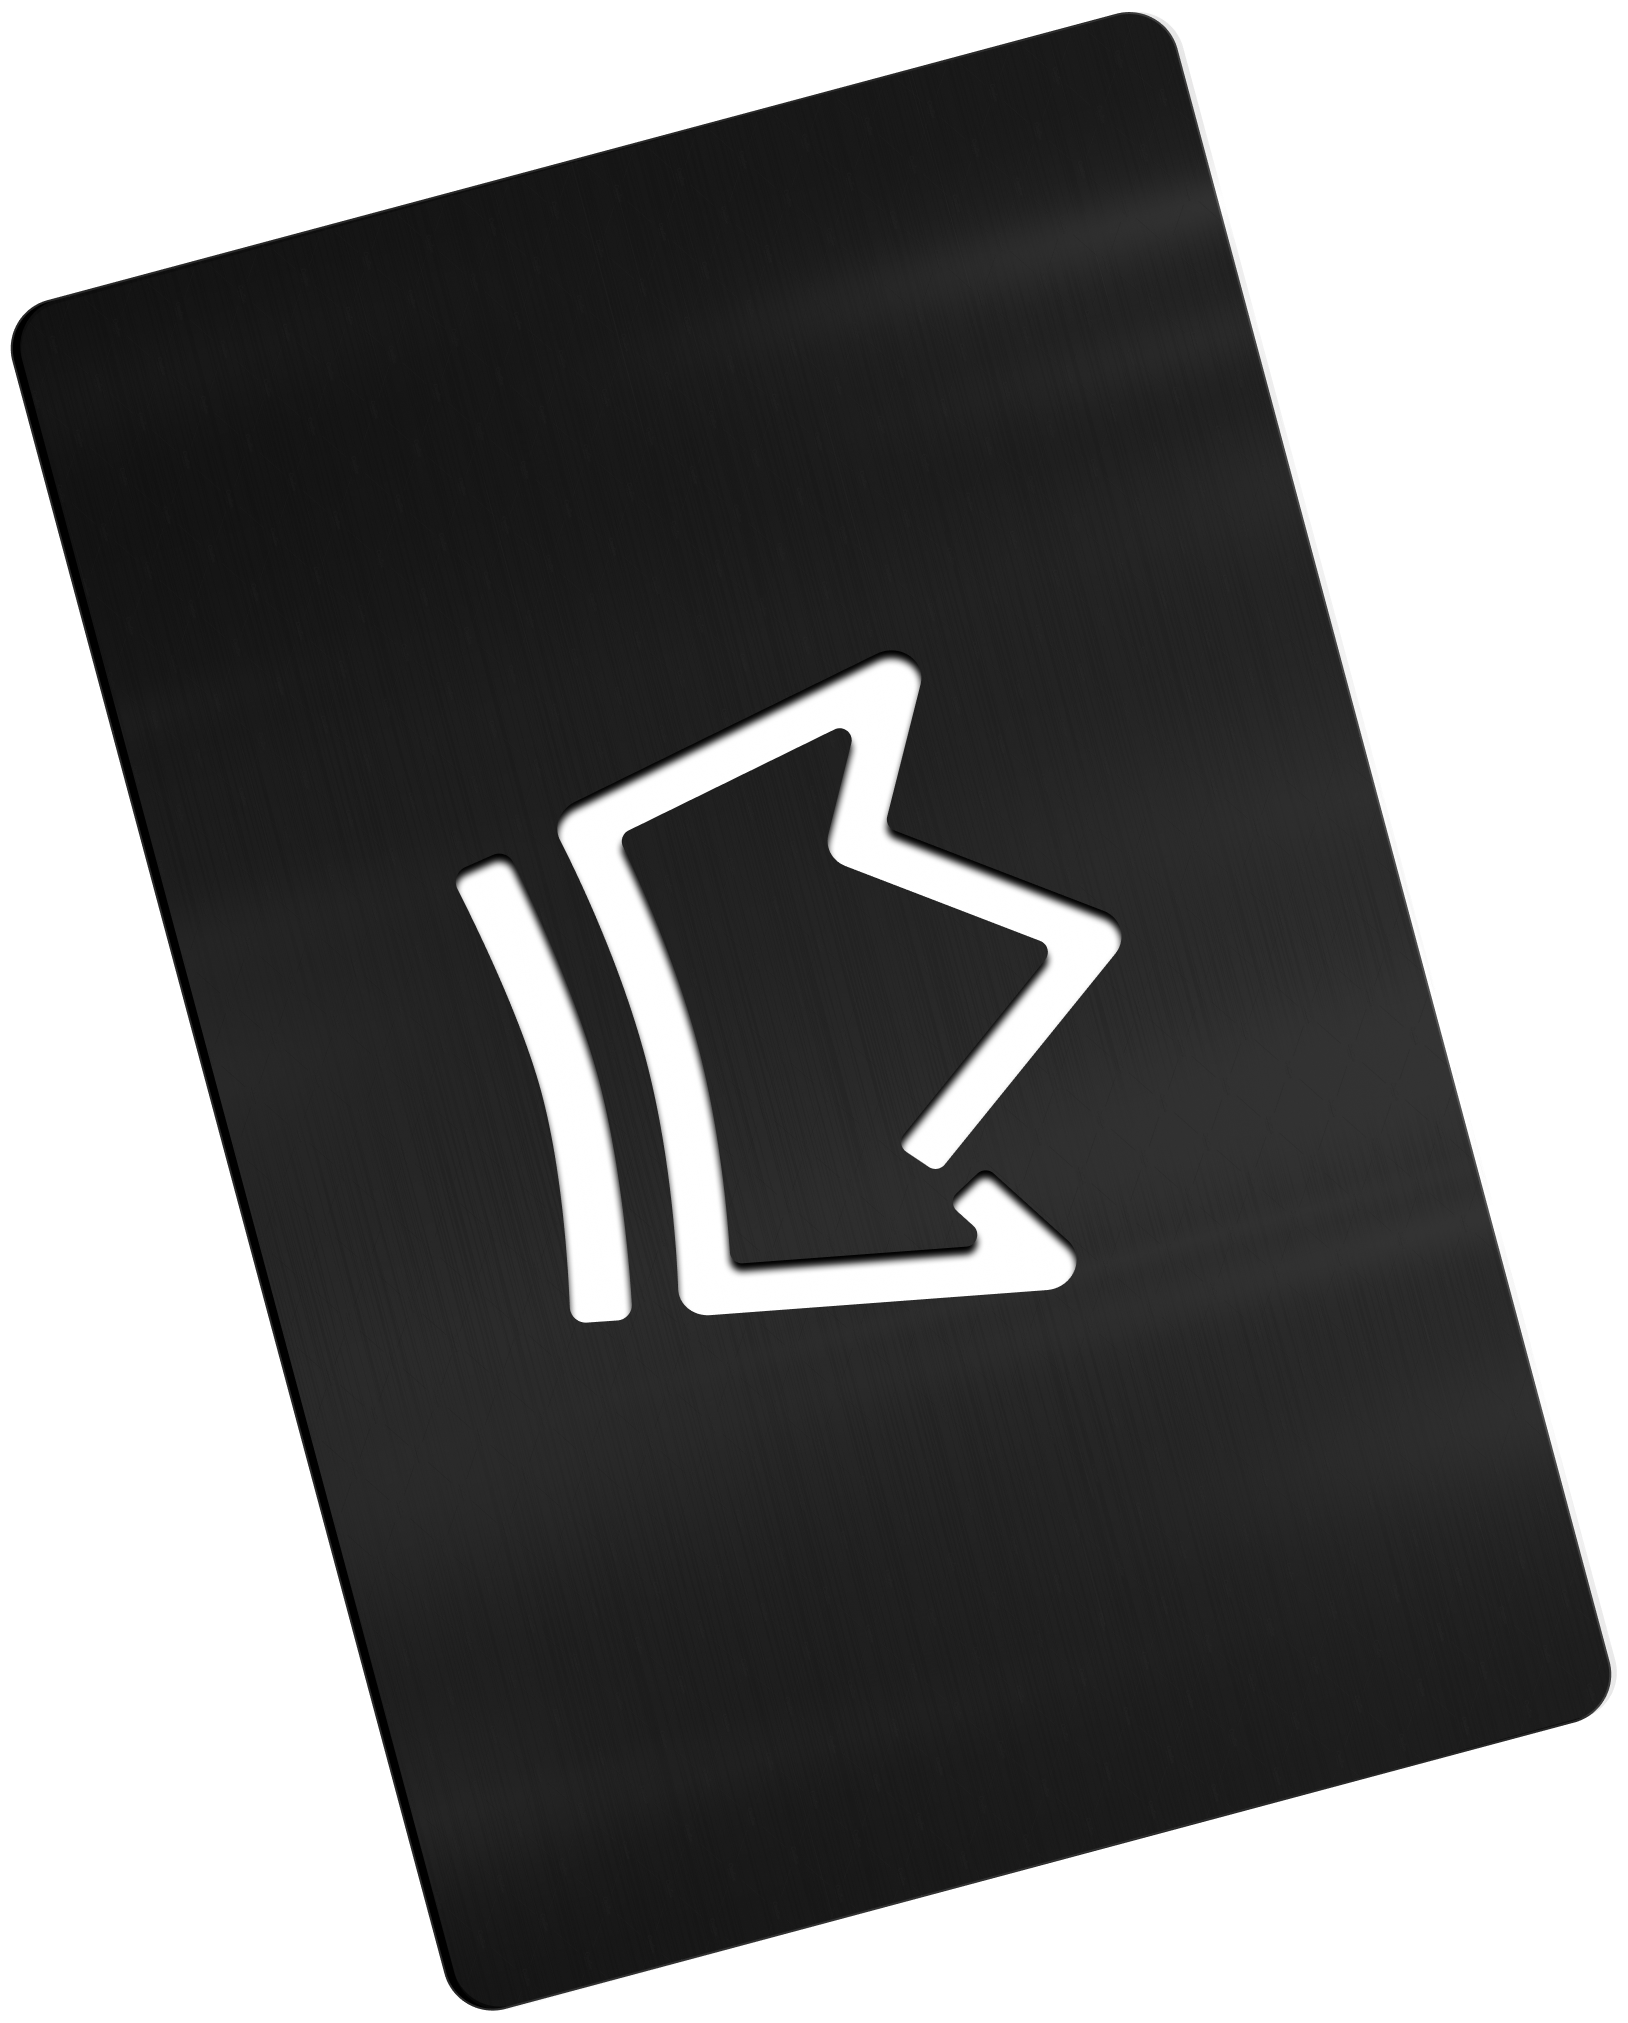 Black with light reflection credit card with a logo of a white color crown in the center